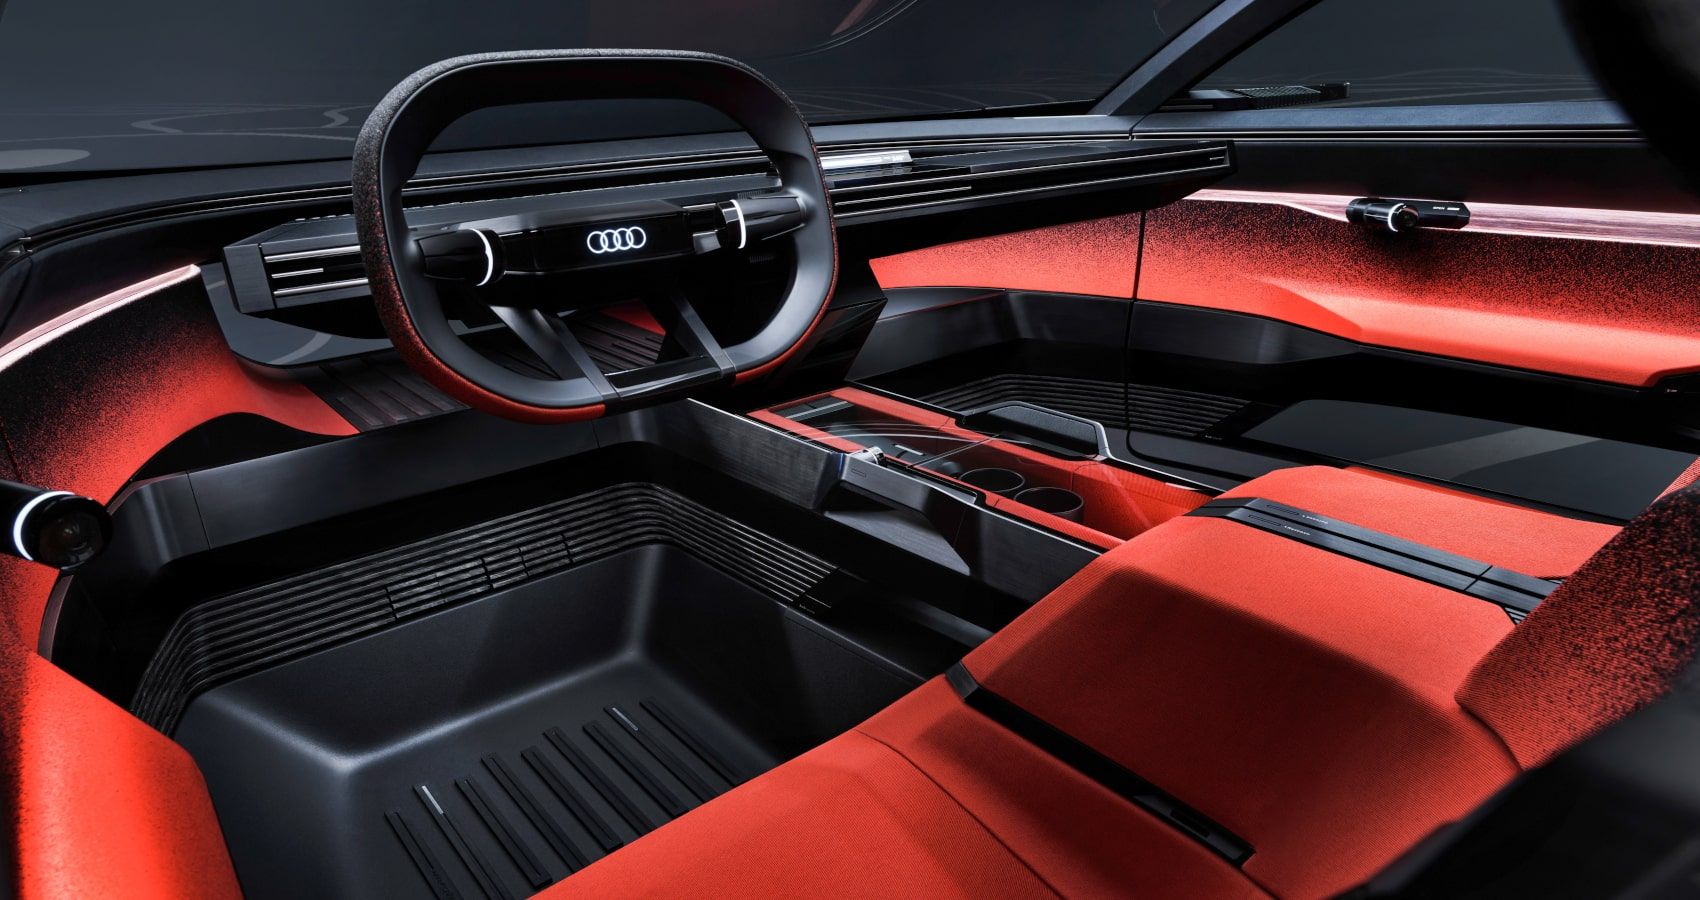 Audi Activesphere Concept Car interior and steering wheel